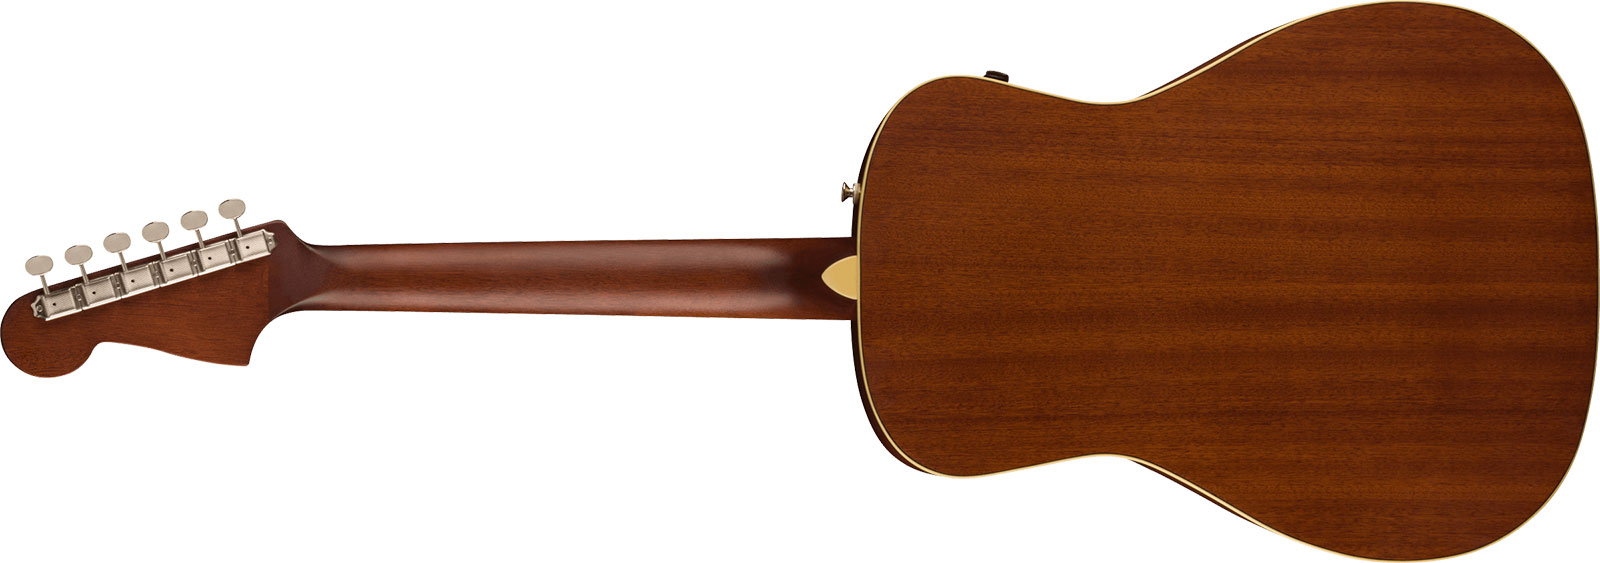 Fender Malibu Player 2023 Parlor Epicea Sapele Wal - Olympic White - Electro acoustic guitar - Variation 1